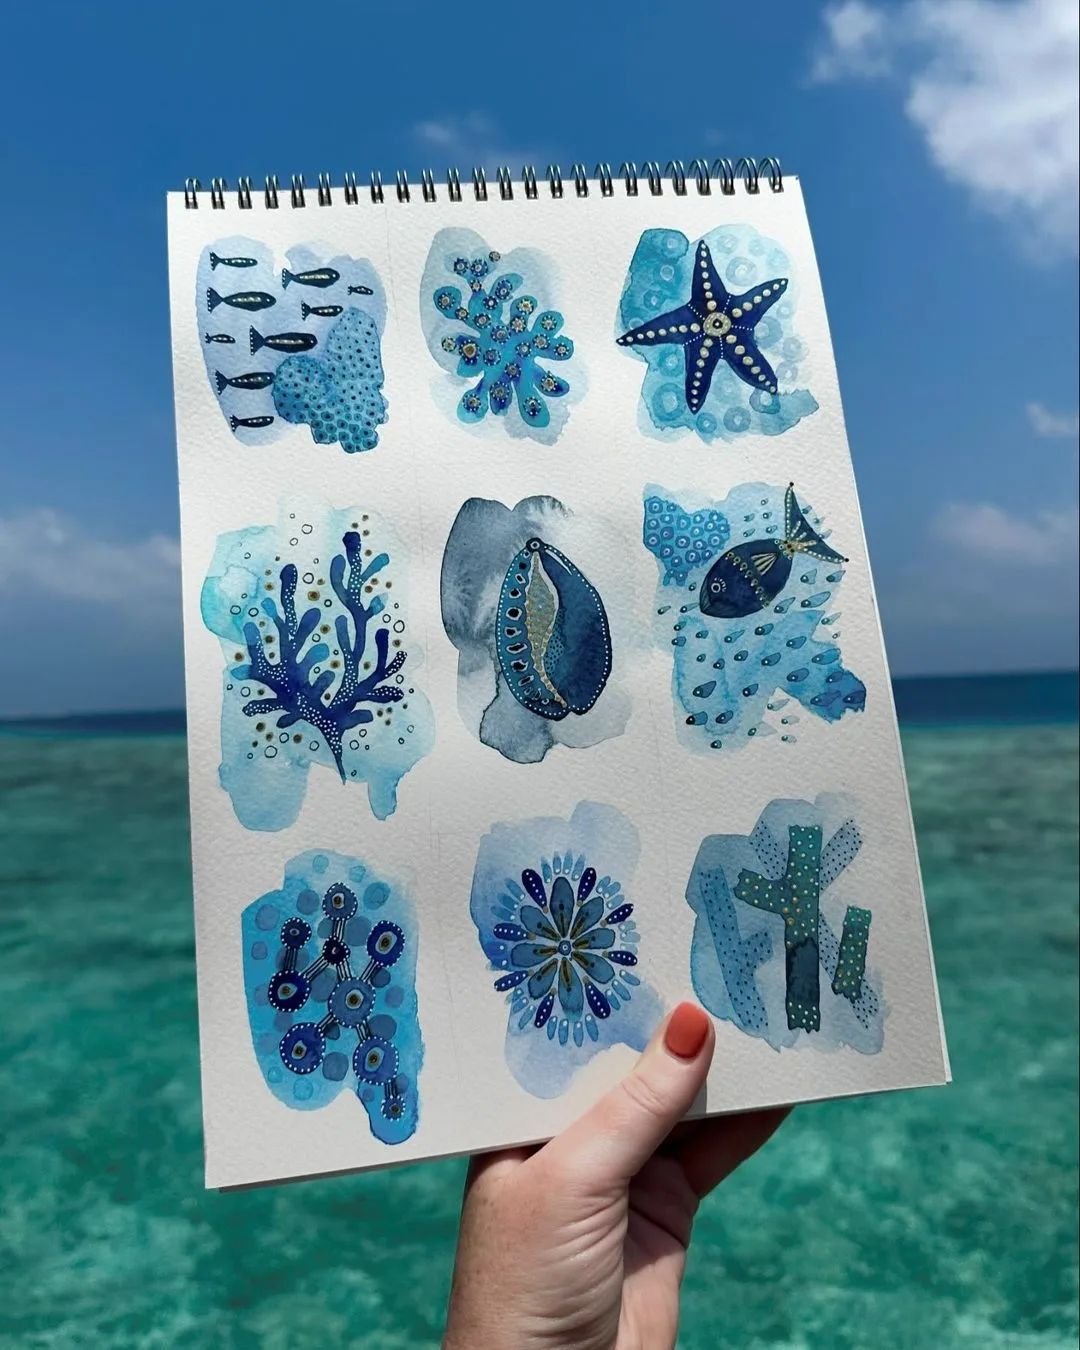 Artist @essoldodesign took a vacation and made her own souvenirs&hellip; We&rsquo;re in total awe. Give her a follow and explore all of her ocean-inspired work!